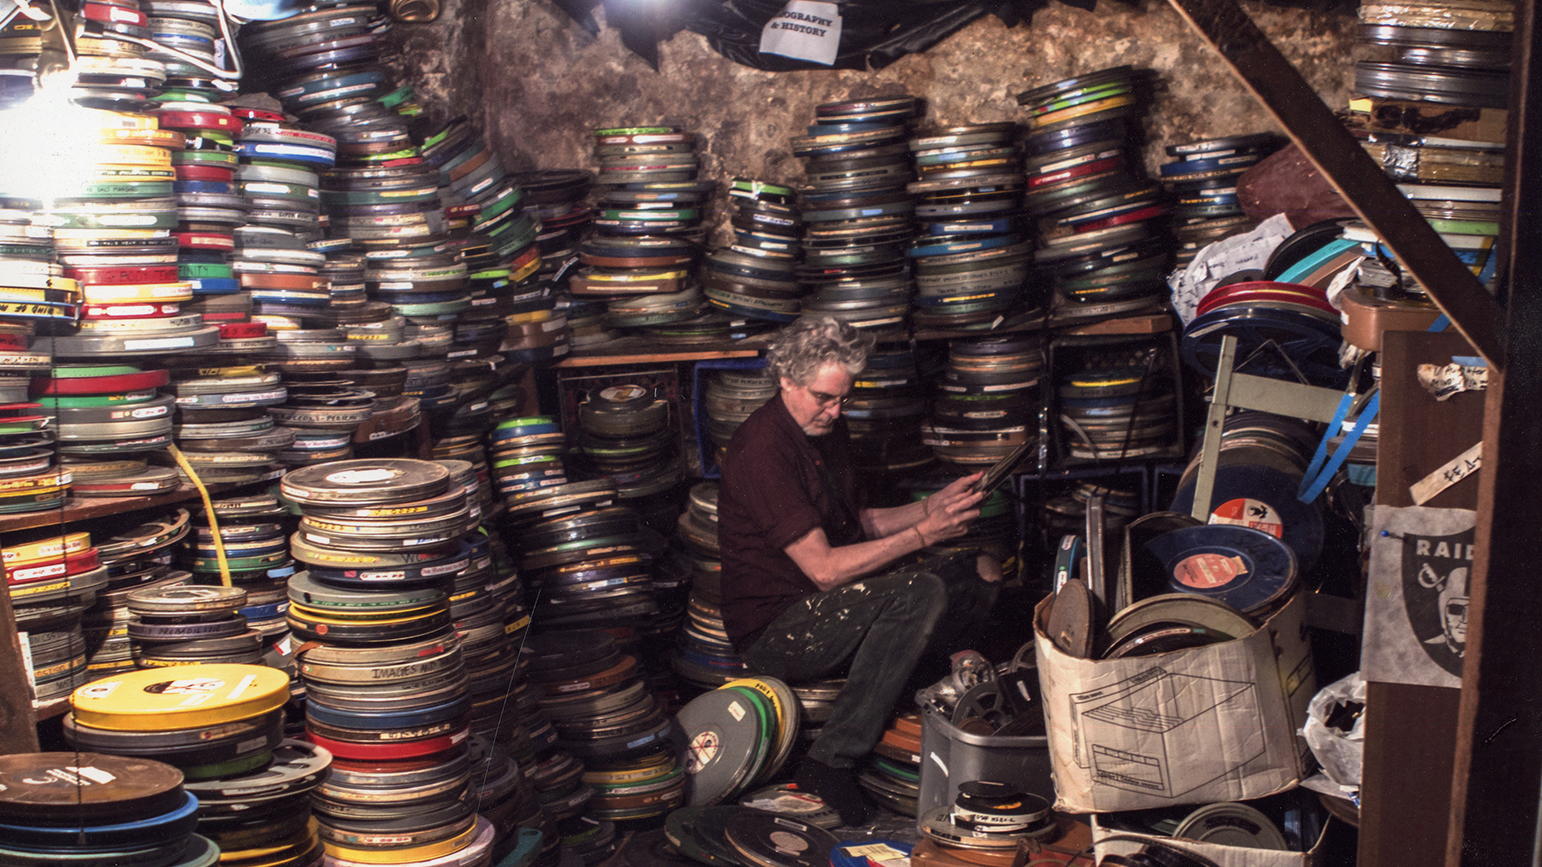 Photograph of a man sitting surrounded by stacks of film reels